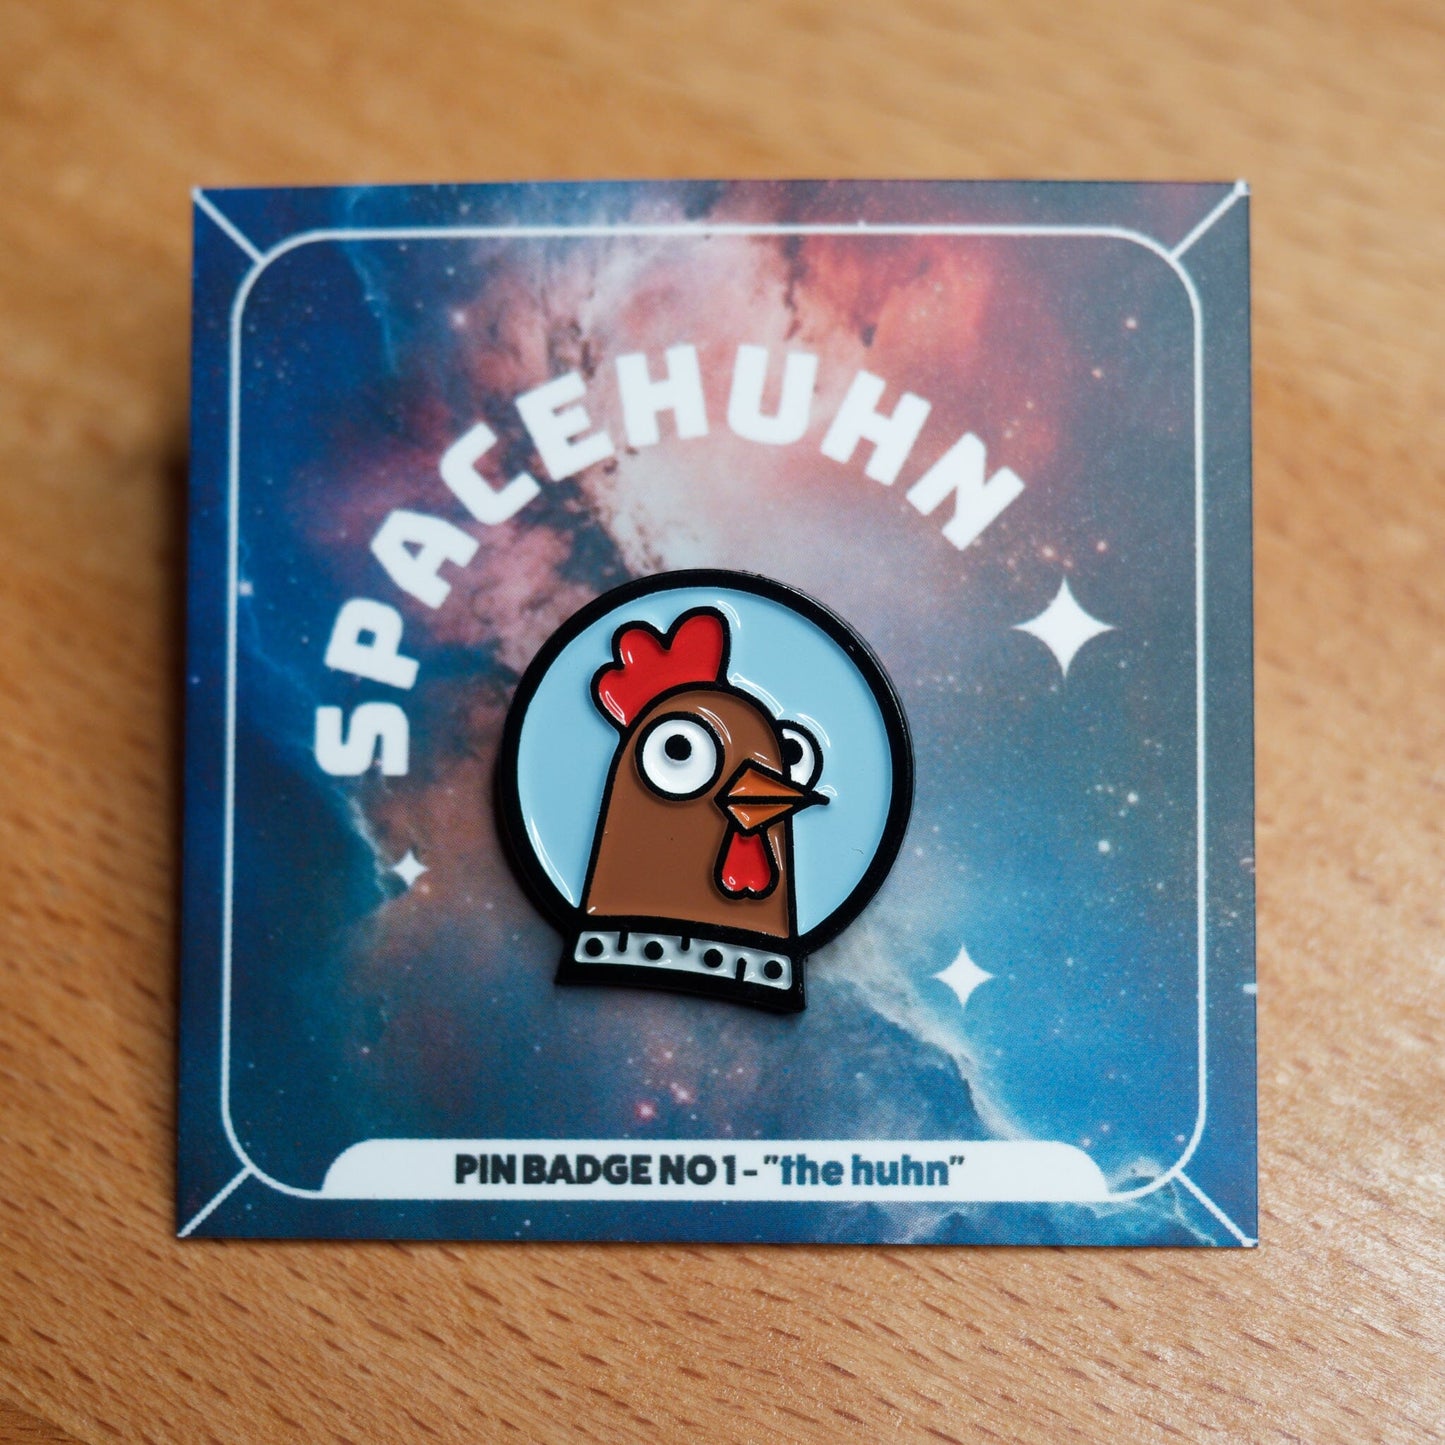 Spacehuhn Enamel Pin on card with space background